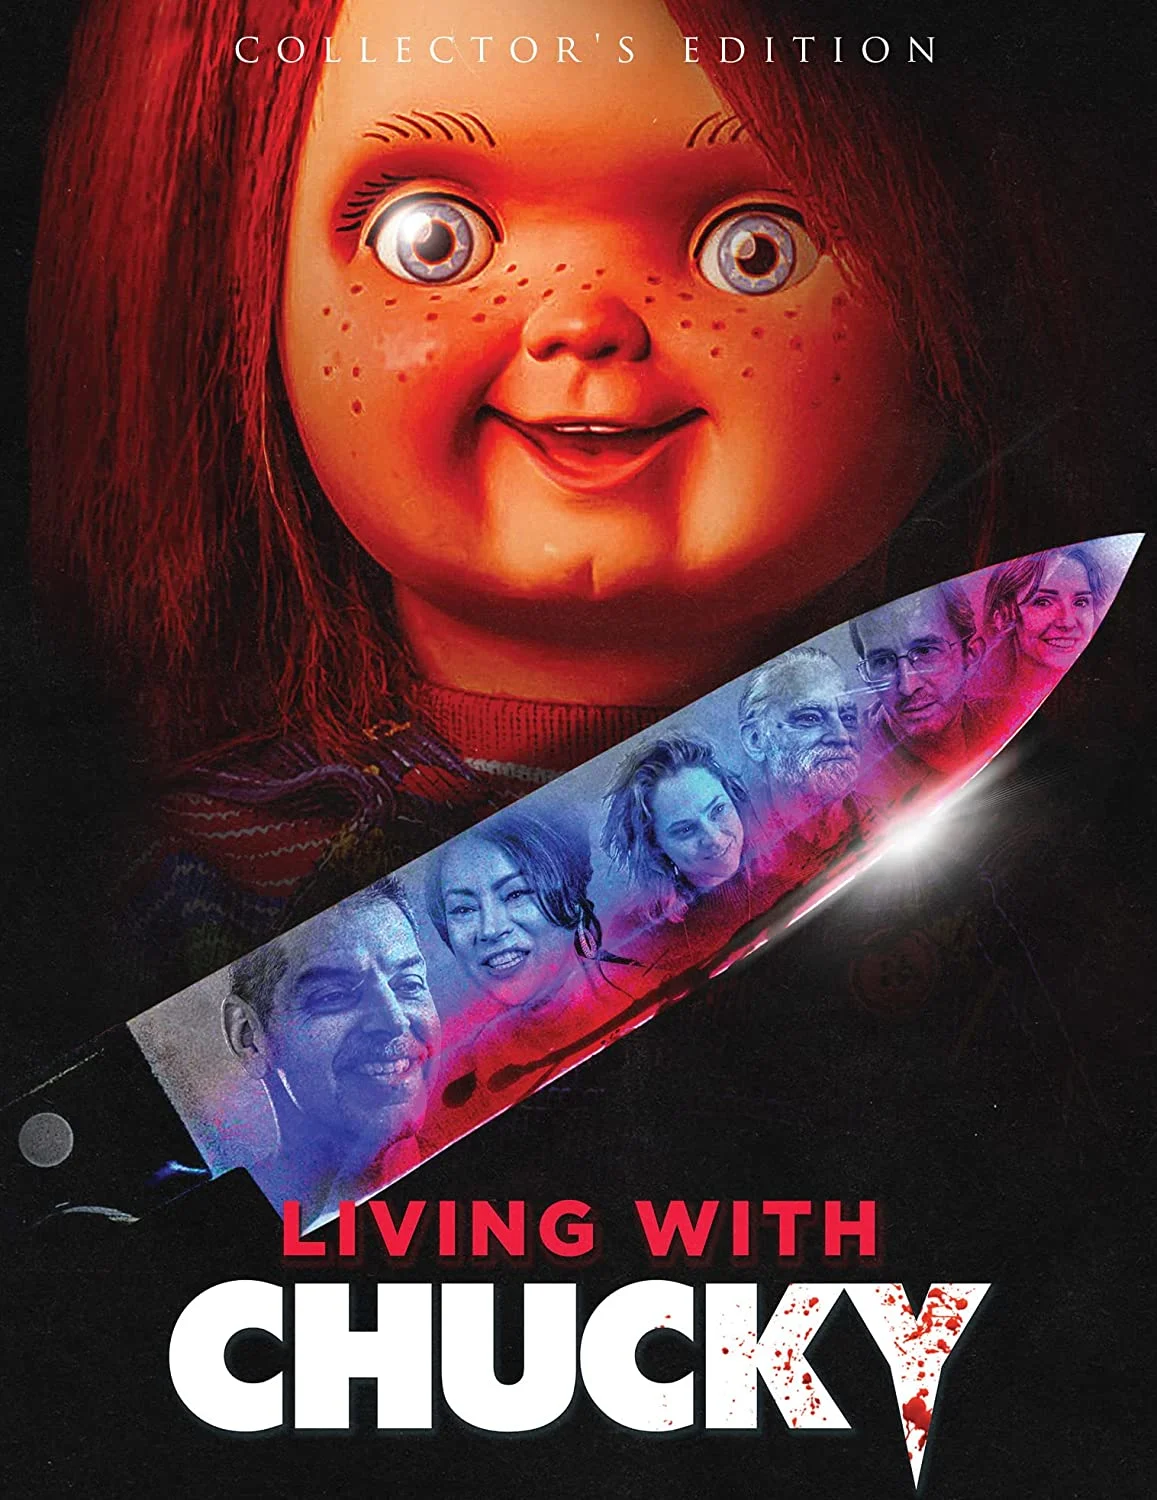 Living With Chucky – Collectors Edition (Blu-ray) on MovieShack